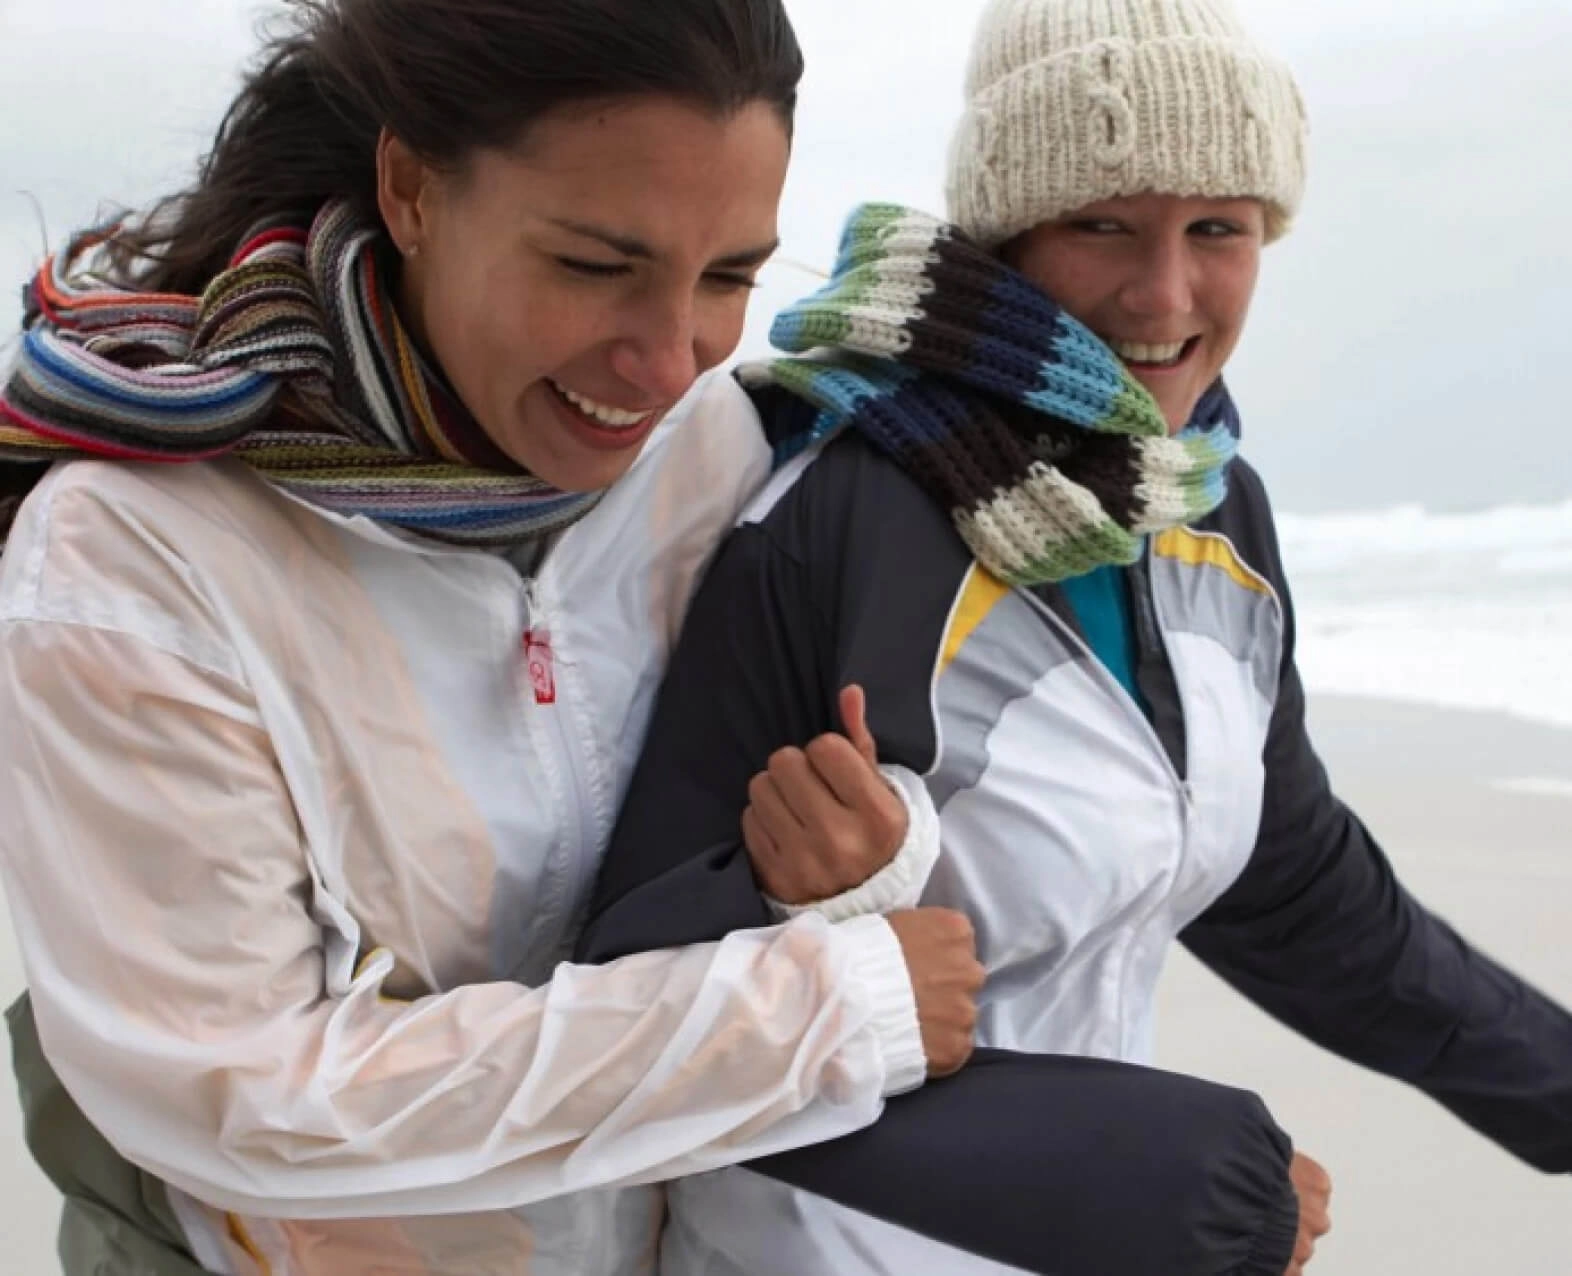 Two women bundled up in jackets and scarves, laughing and walking together on a windy beach. (photo)